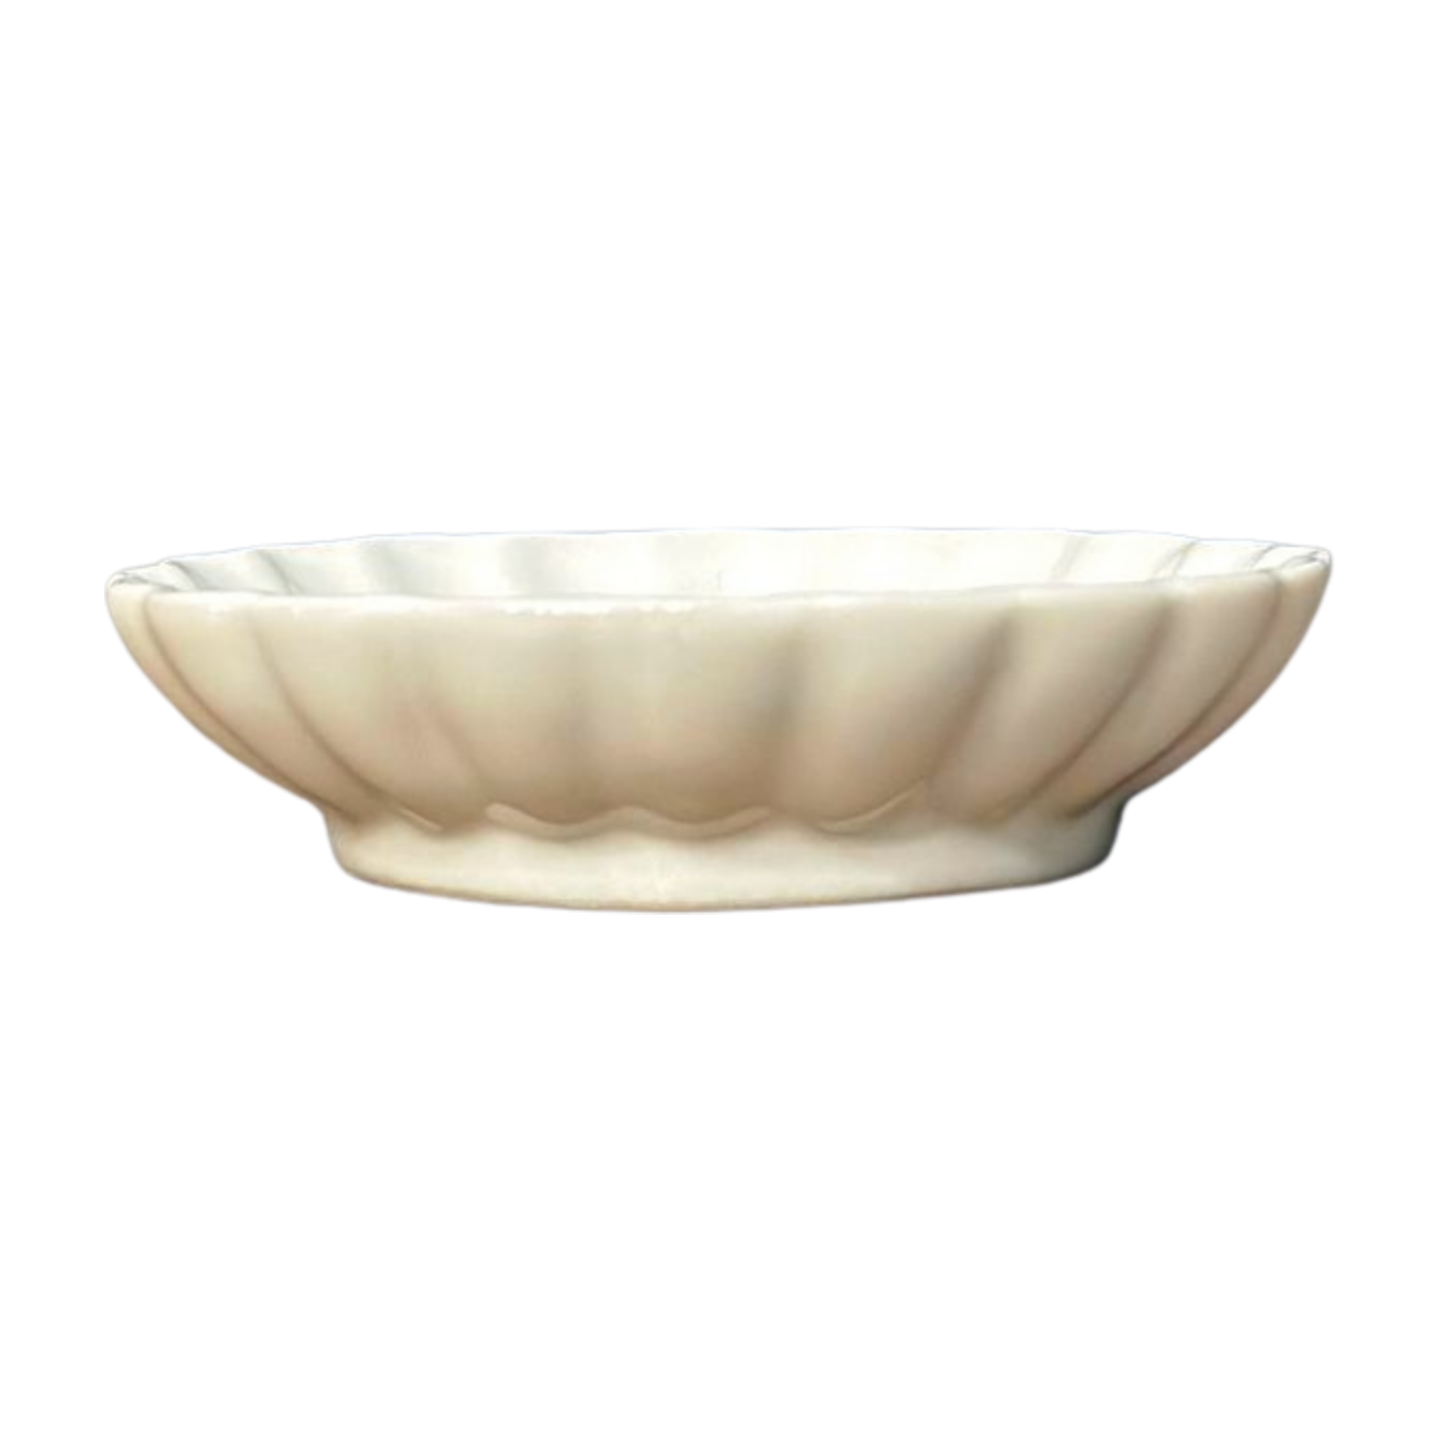 Japanese Sauce Plate in White